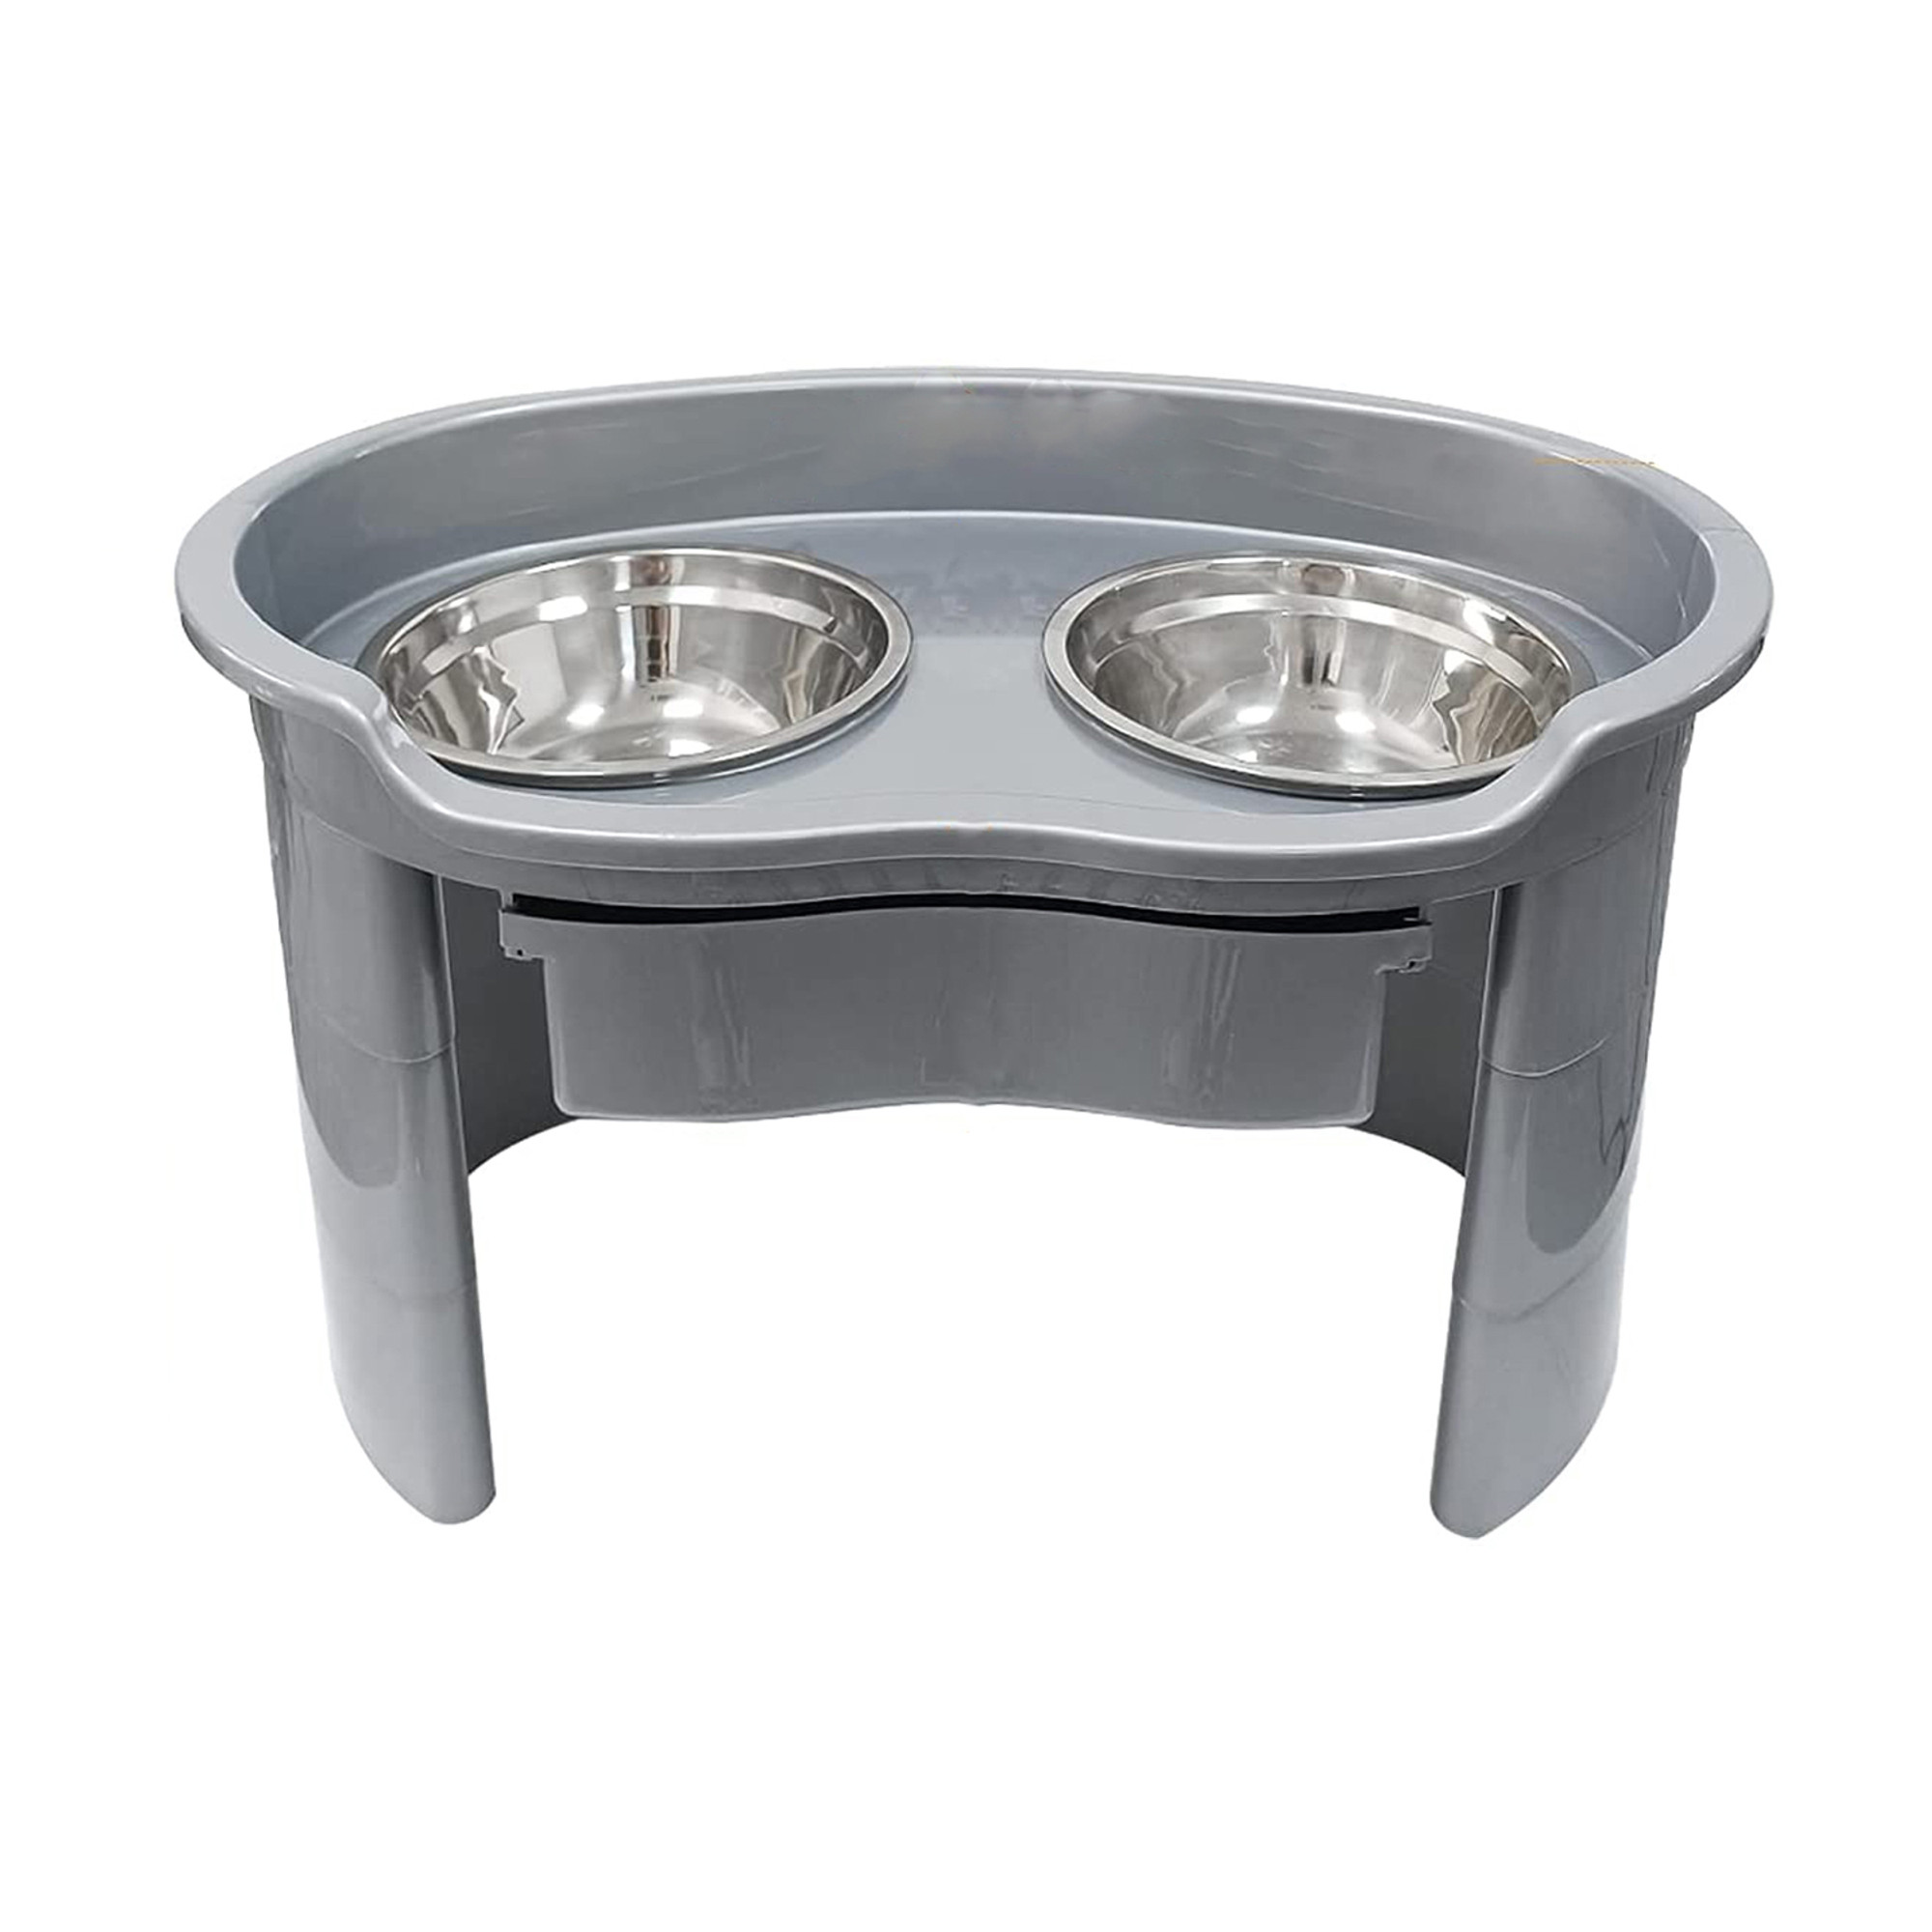 Elevated Dog Bowls 4 Height Adjustable Raised Dog Bowl with 2 Stainless  Steel Dog Food Bowls for Small Medium Large Dogs, Pets 